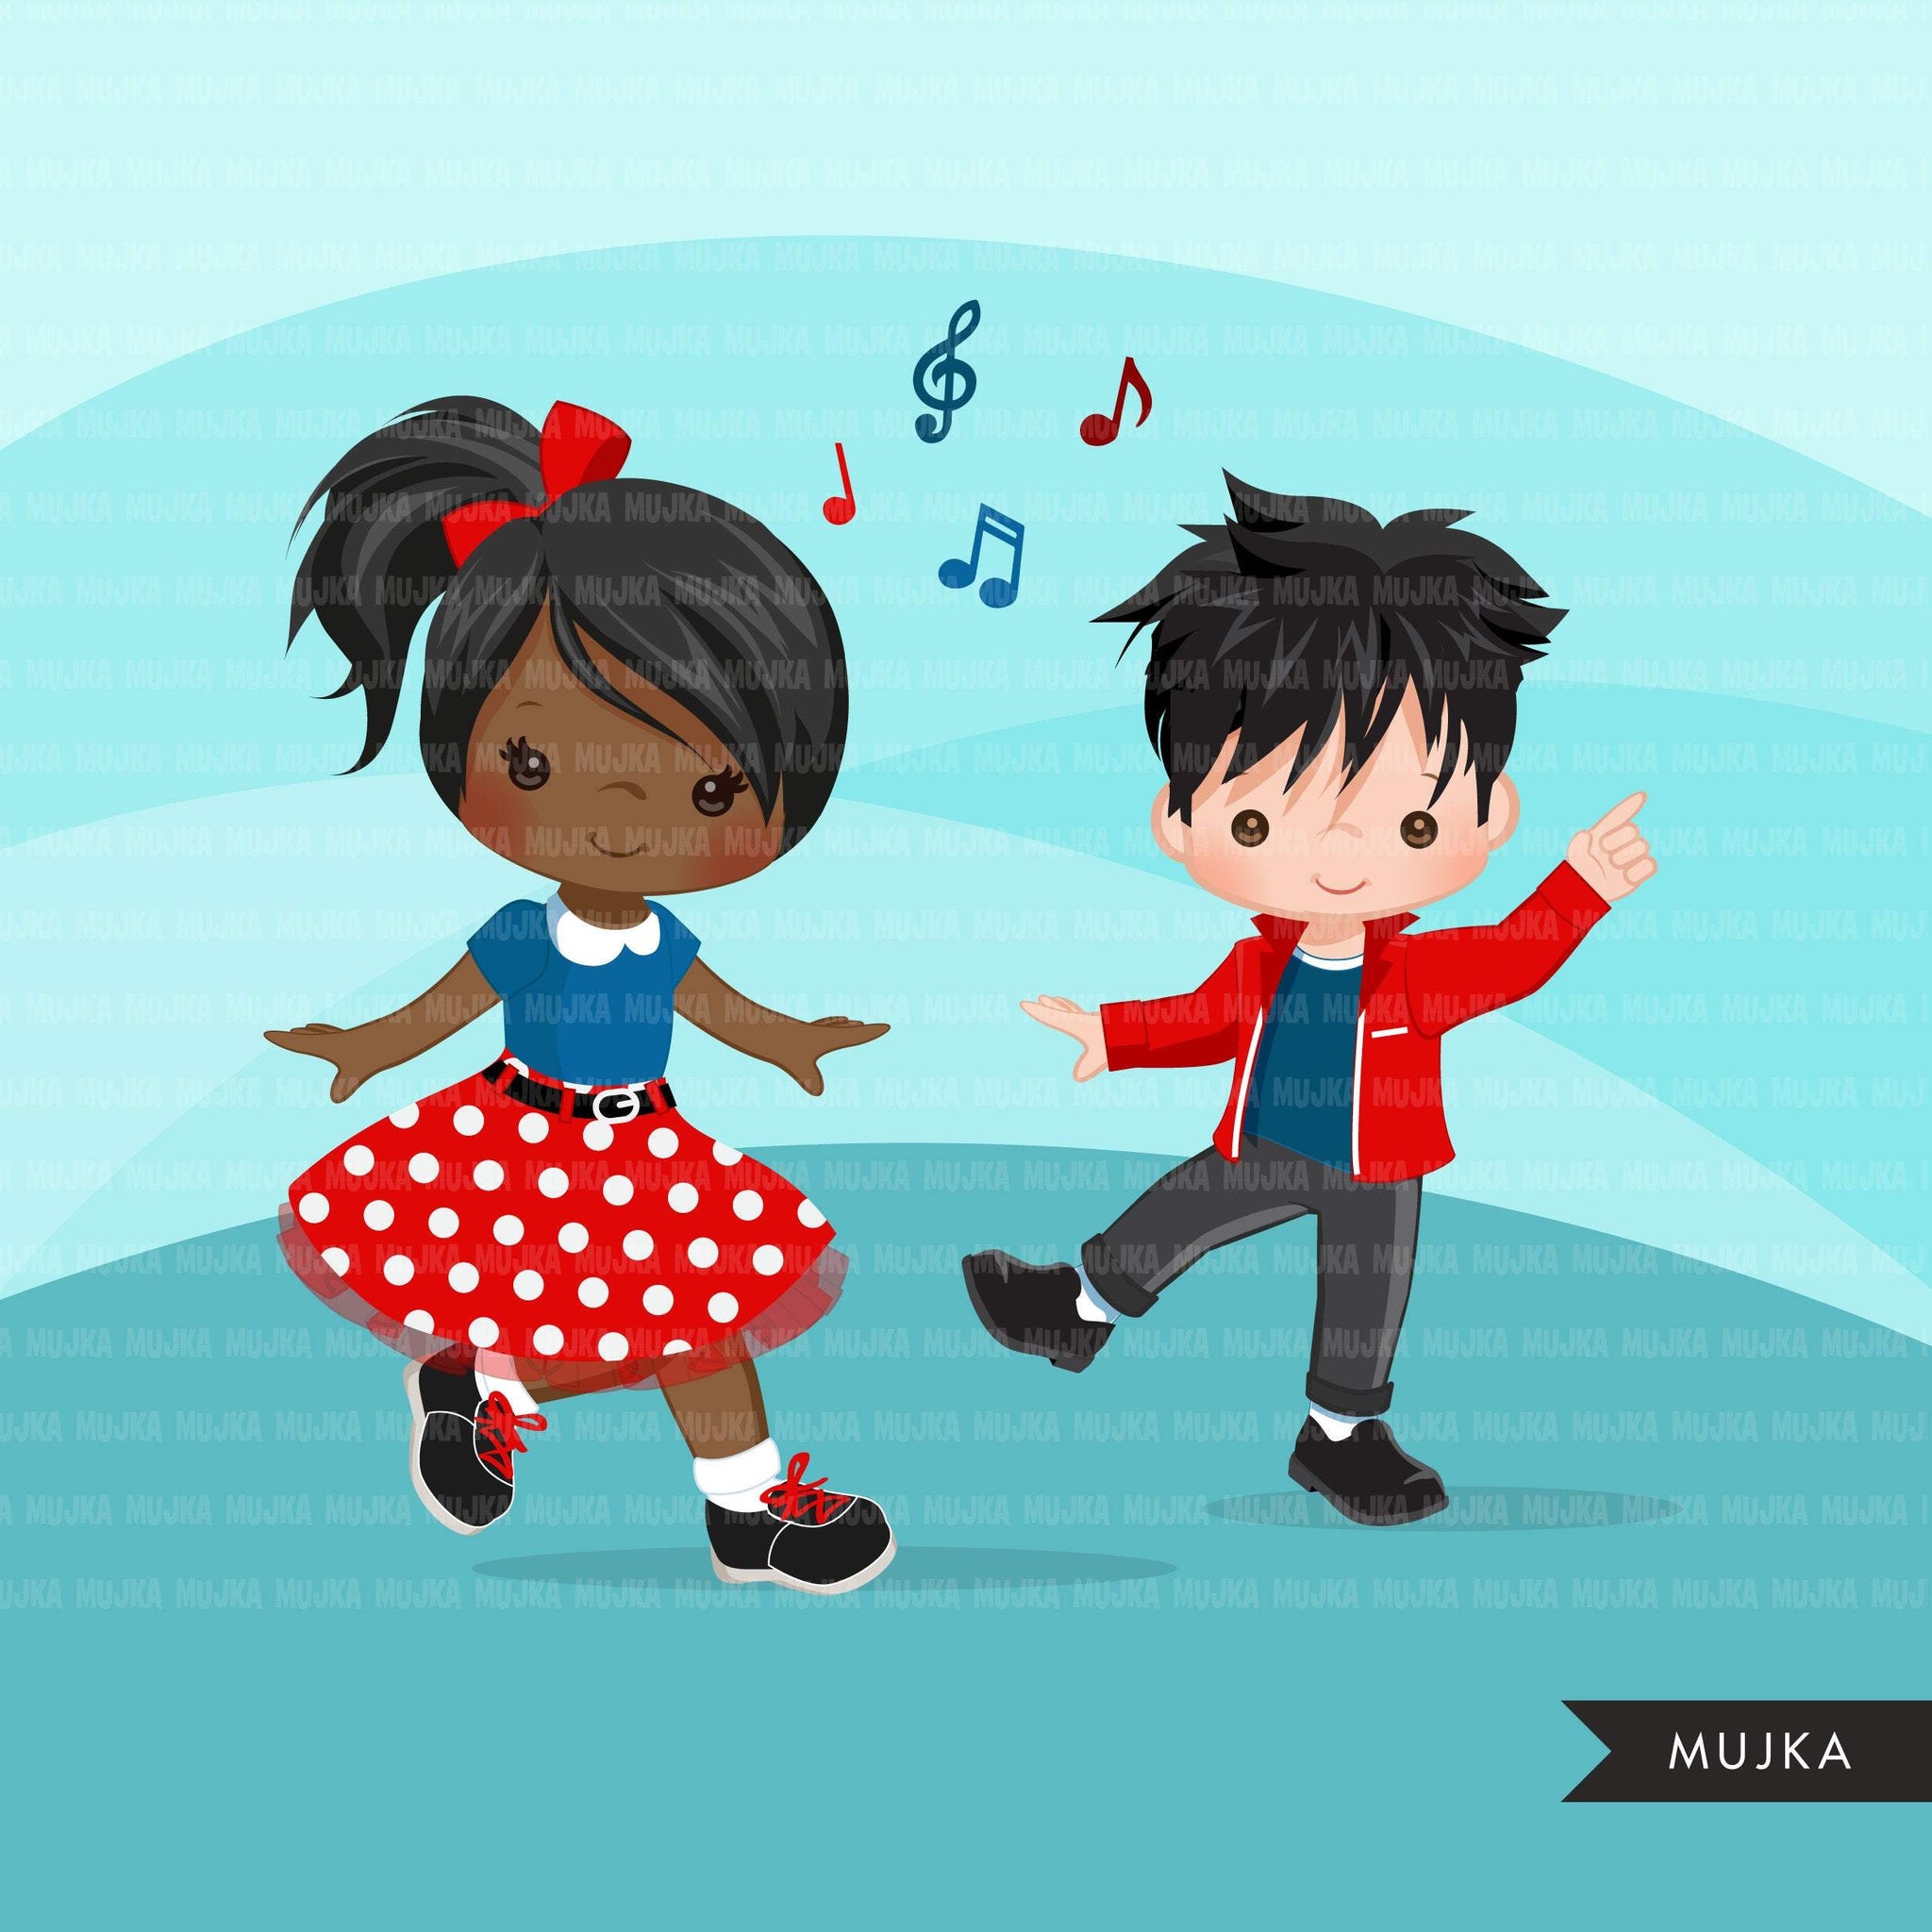 Sock Hop 4th of July Party Girls Clipart, 50's retro characters